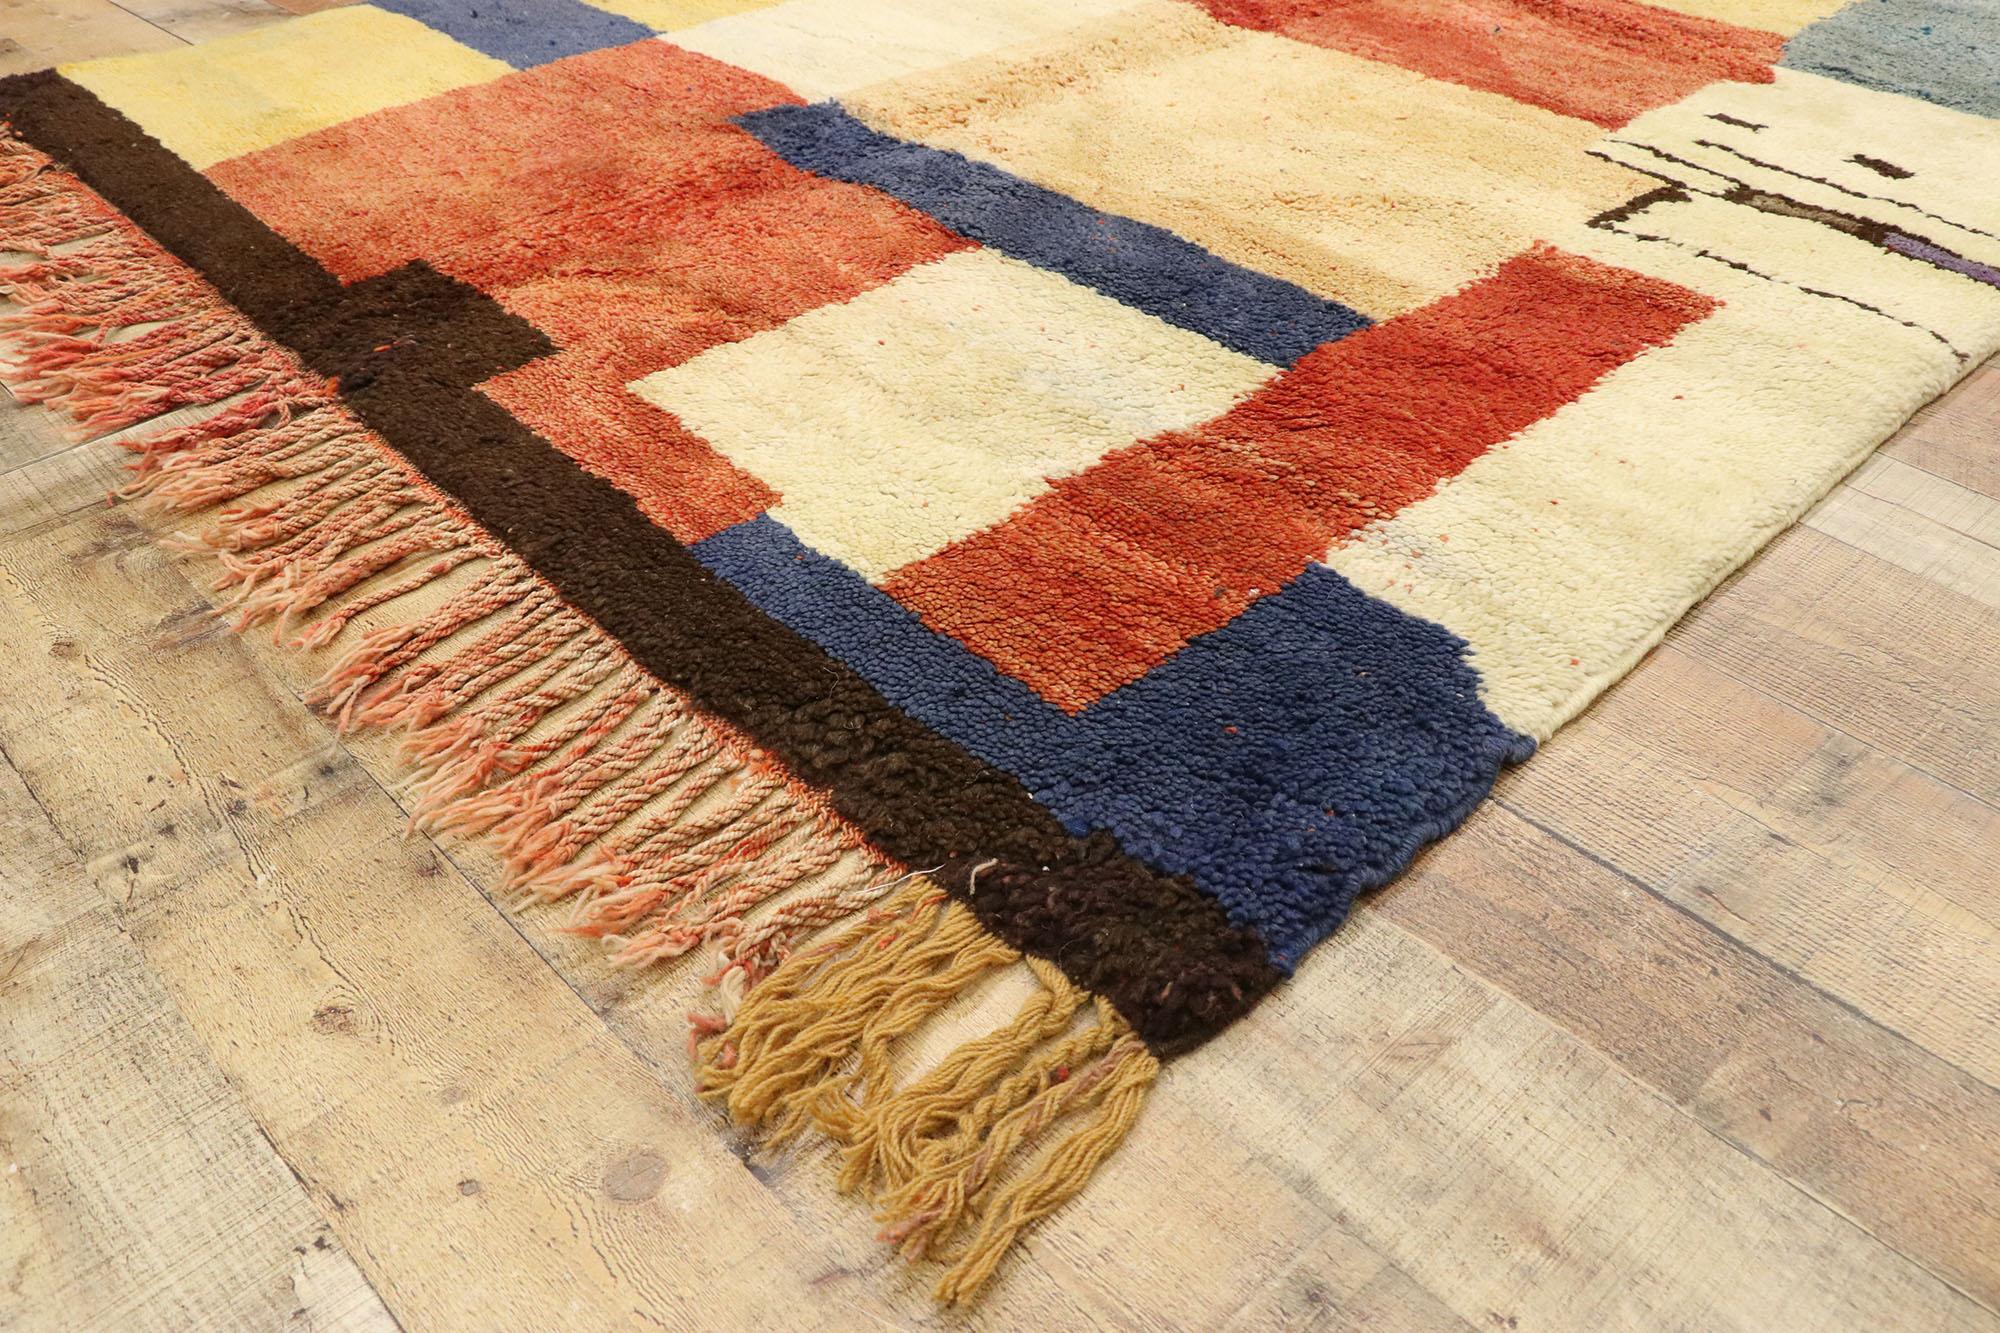 Hand-Knotted Vintage Berber Moroccan Rug with Postmodern Cubism Bauhaus Mondrian Style